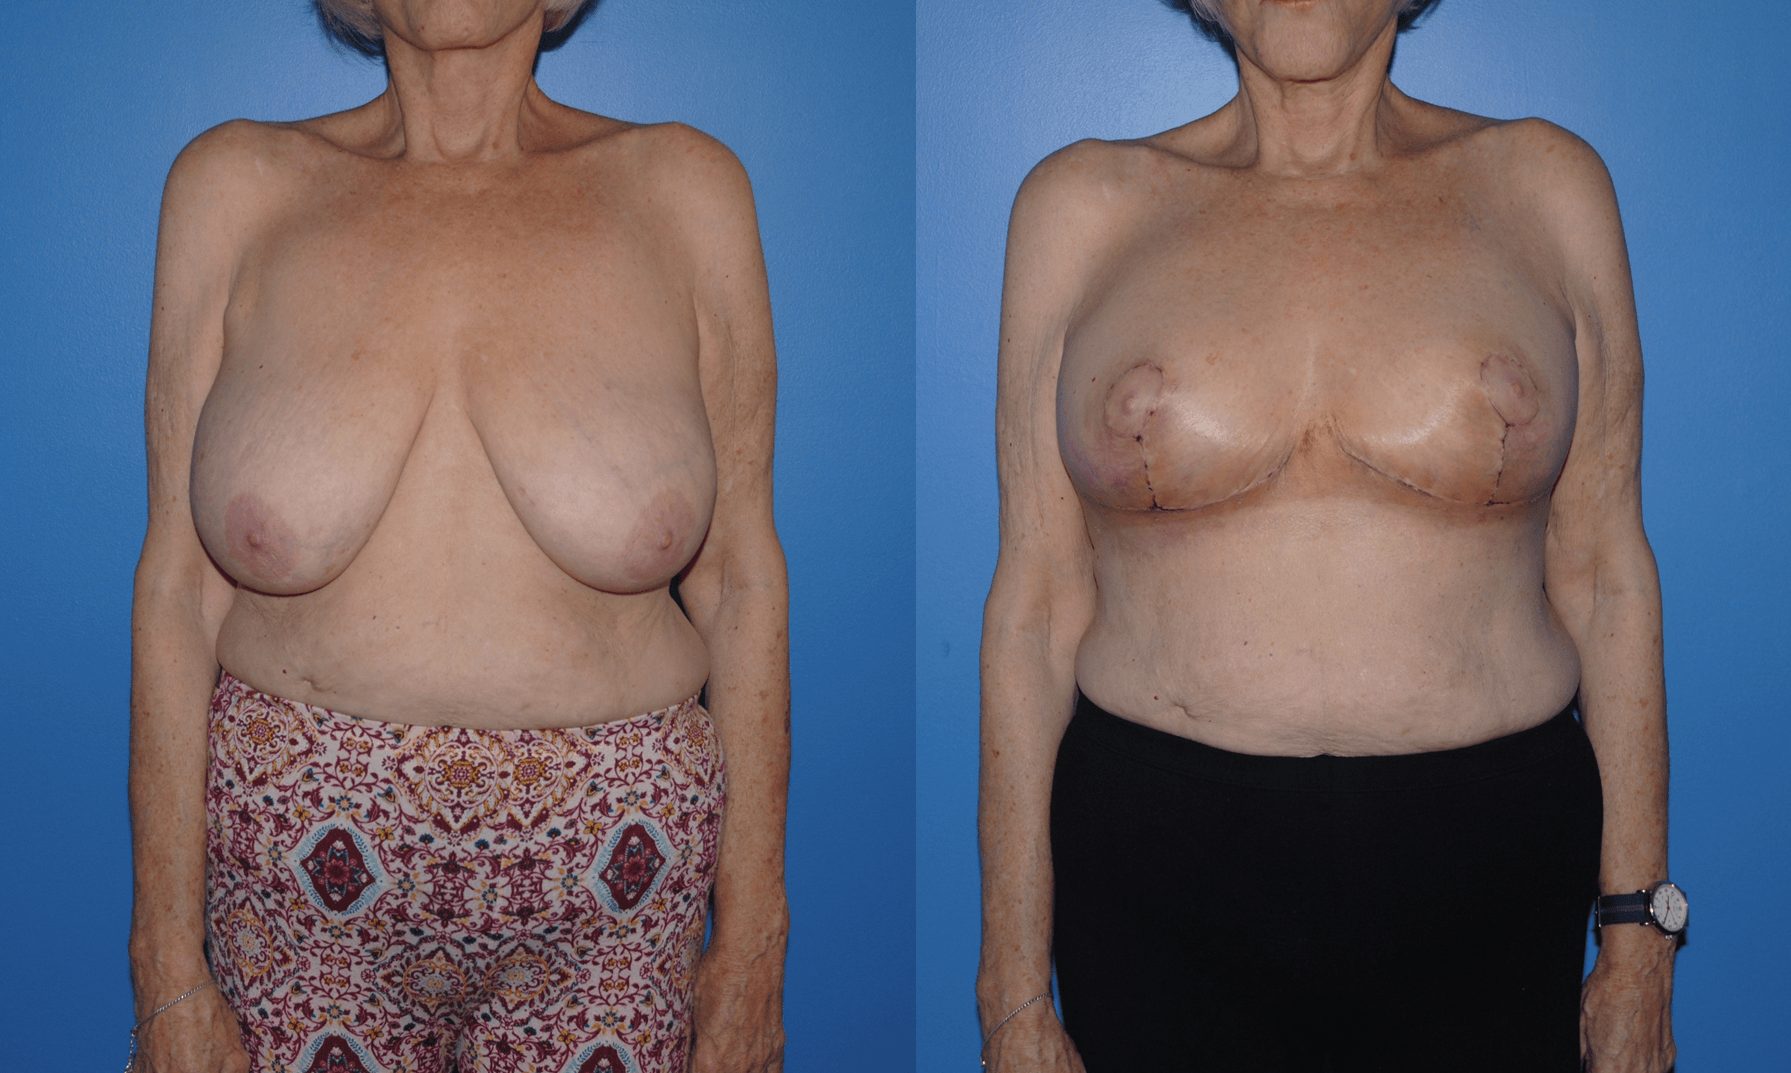 Oncoplastic Reconstruction Following Lumpectomy for Breast Conservation. Early Post-Operative Results. What to Expect?